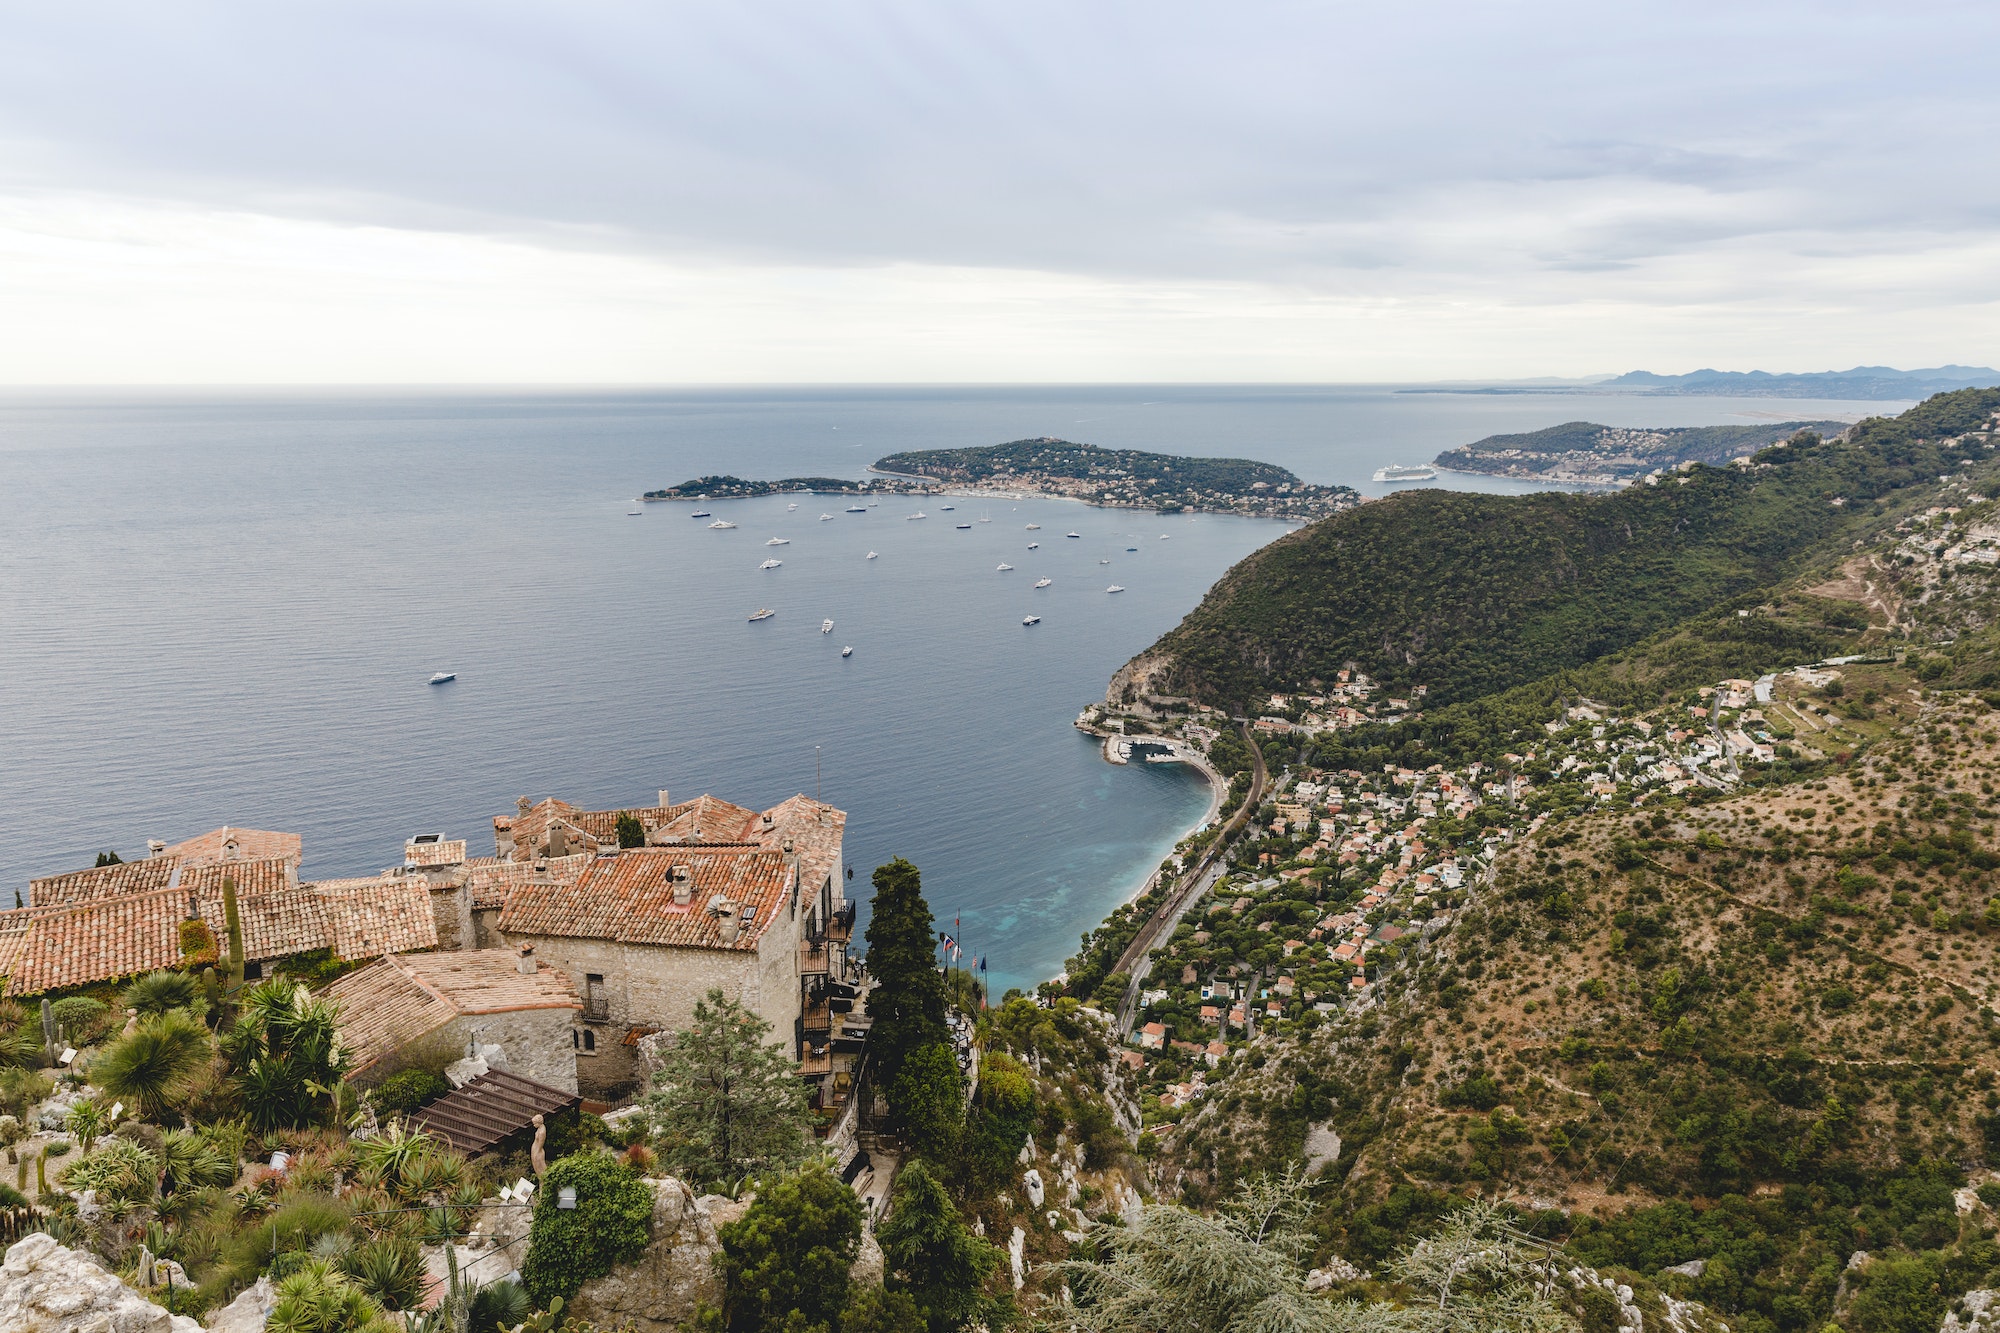 aerial view of city located on hills by seashore on cloudy day, Eze, France